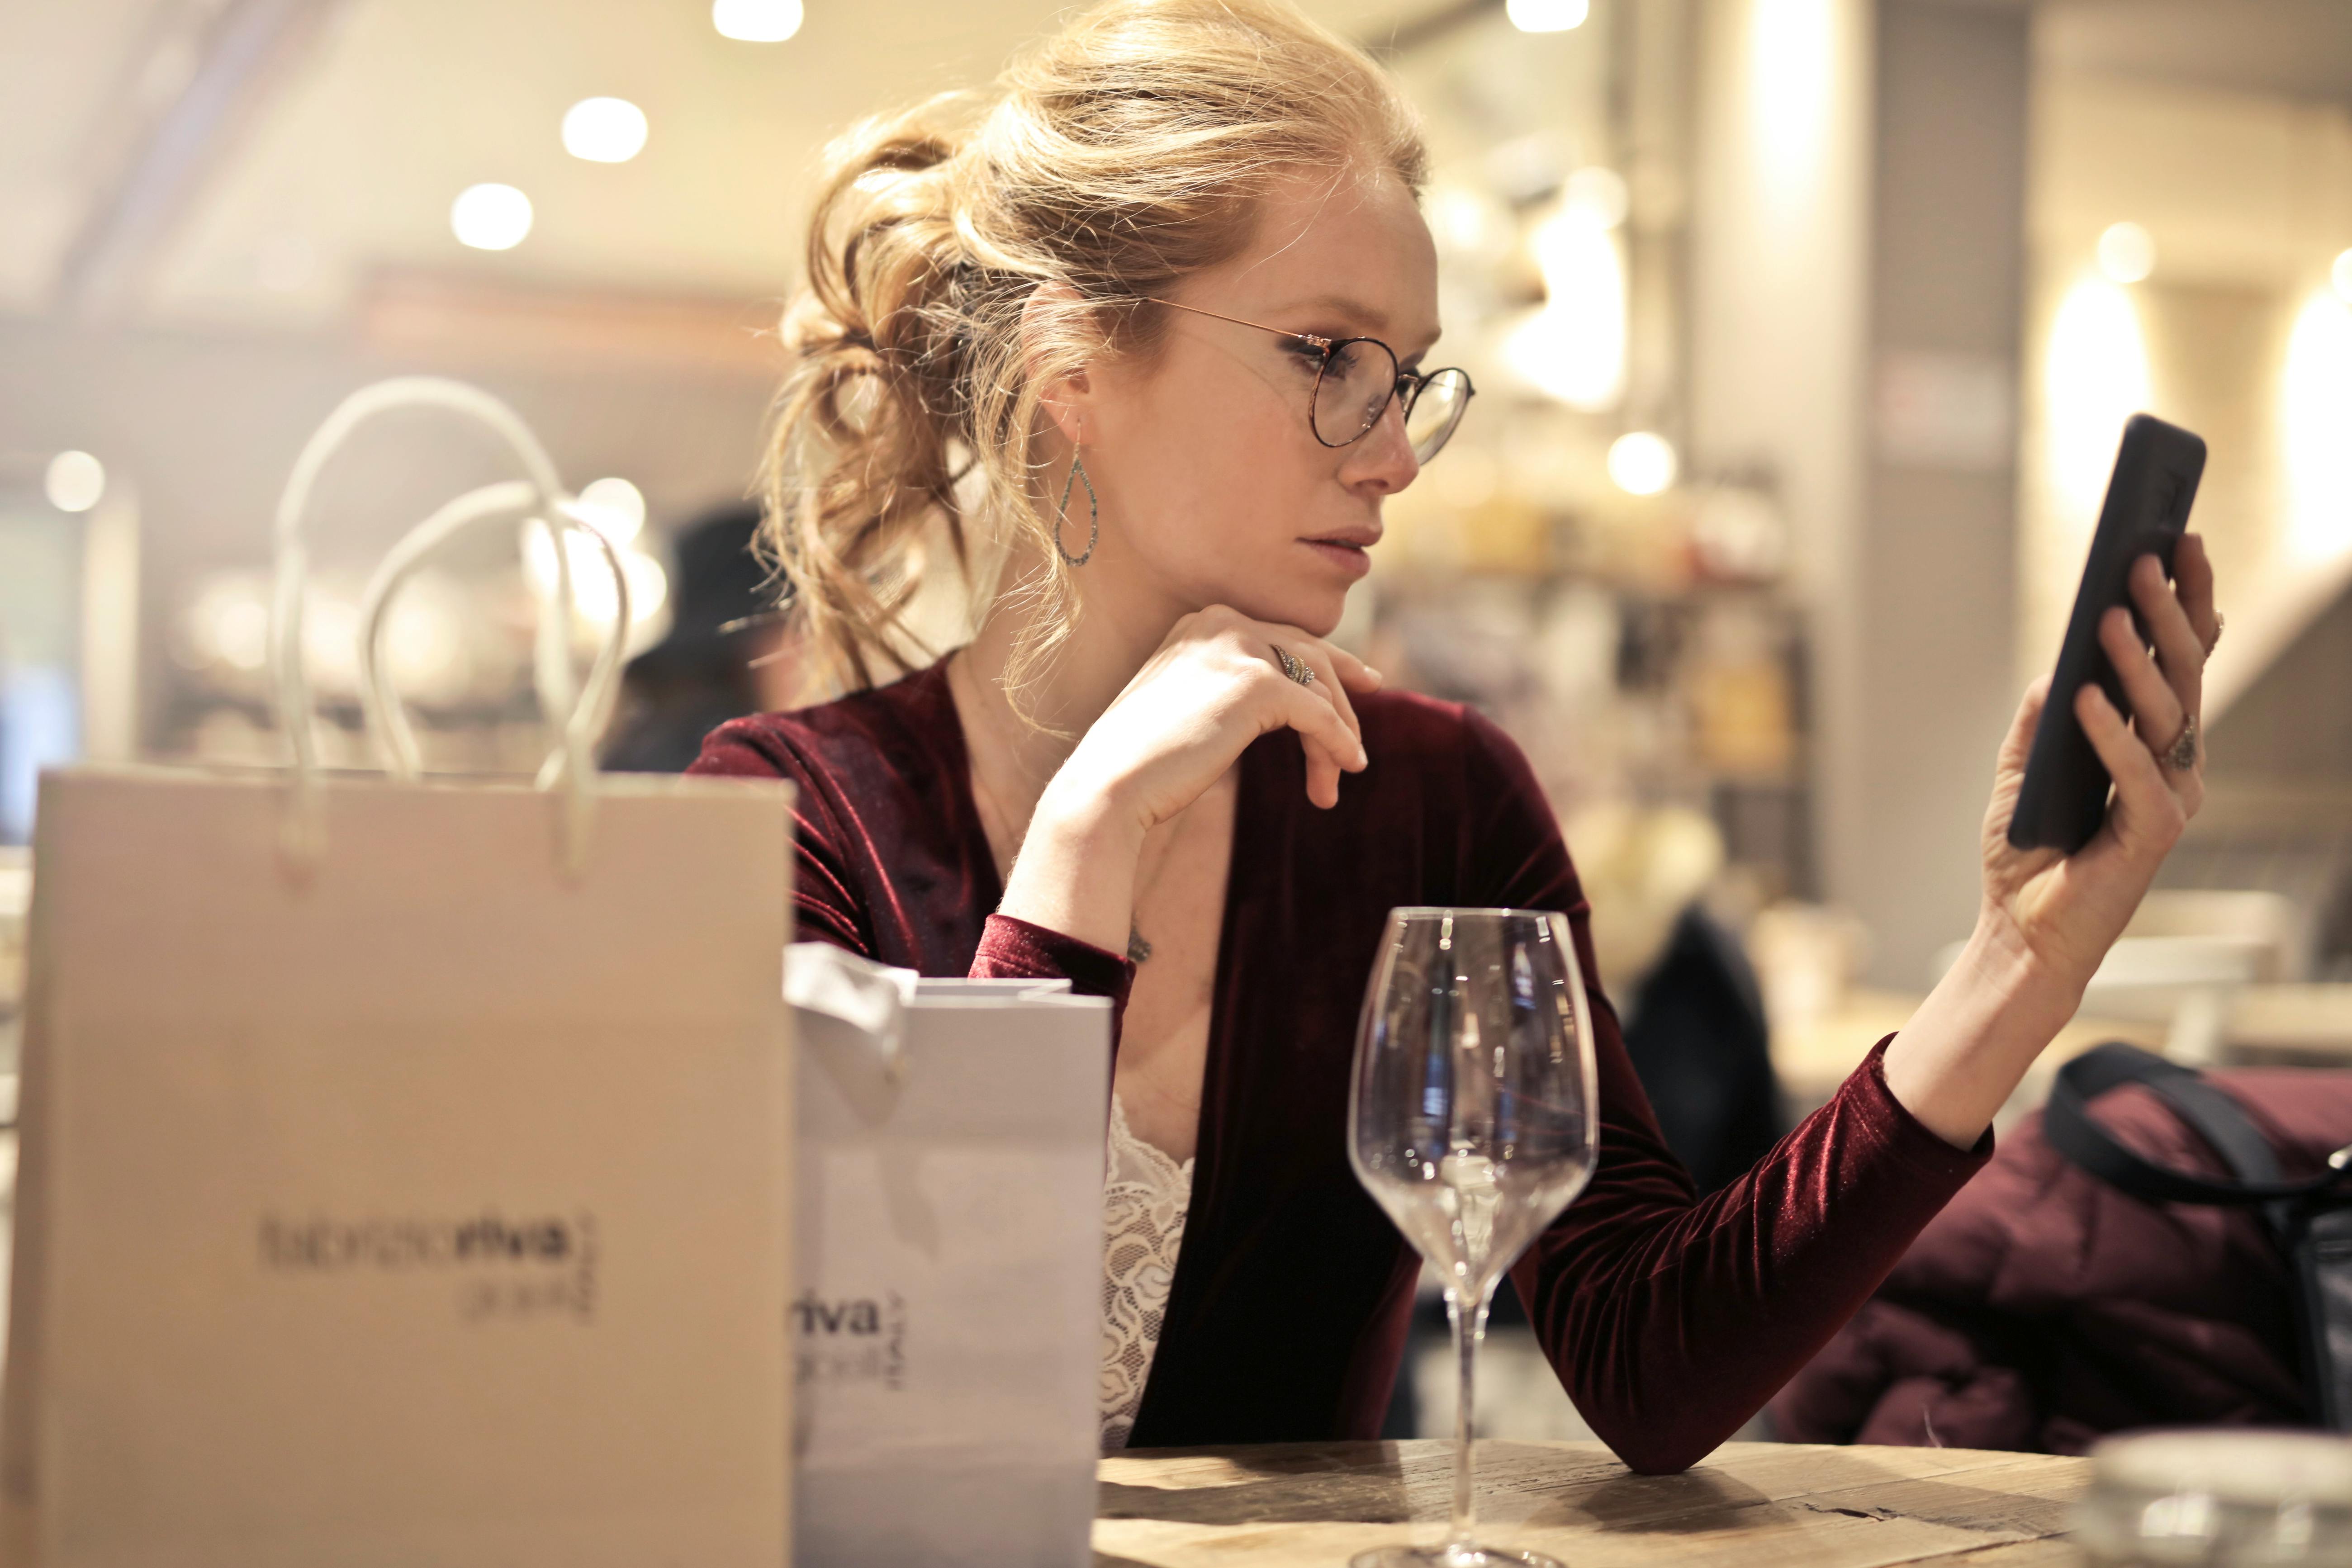 Rich woman in a restaurant | Source: Pexels